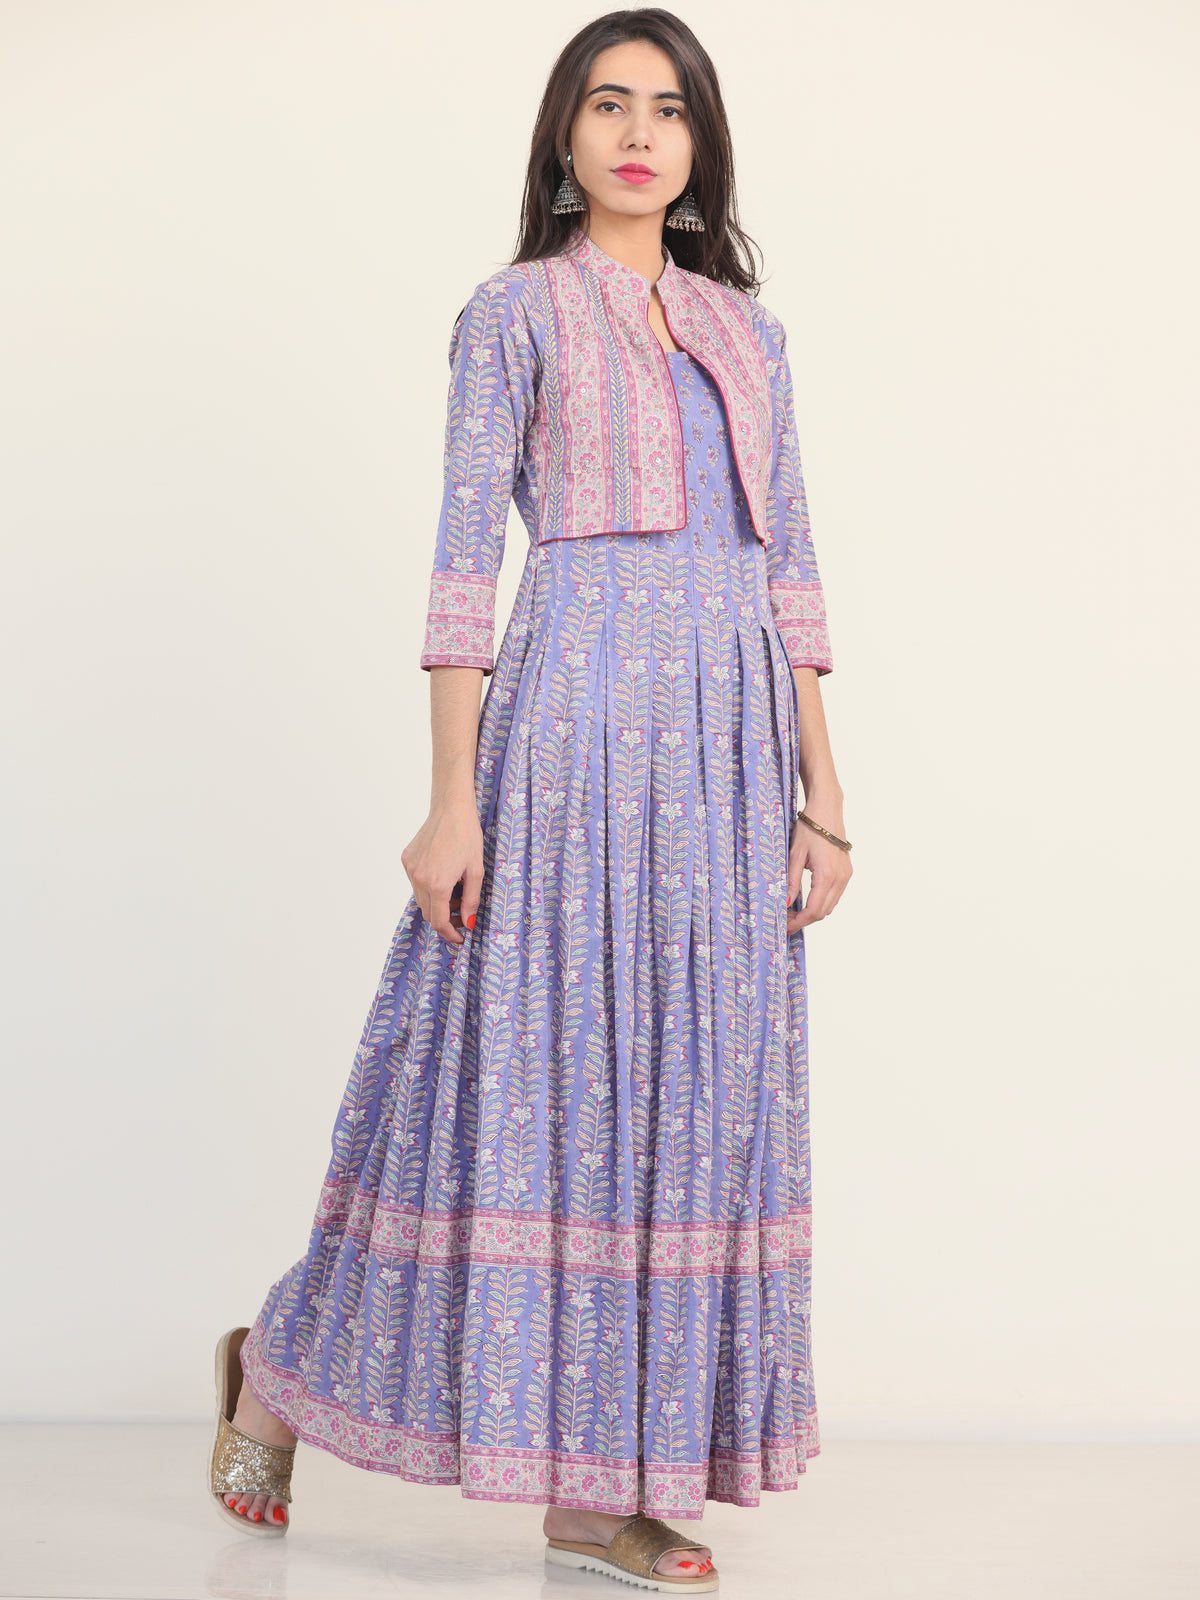 Fiza Roheen Pleated Embroidered Long Jacket Dress